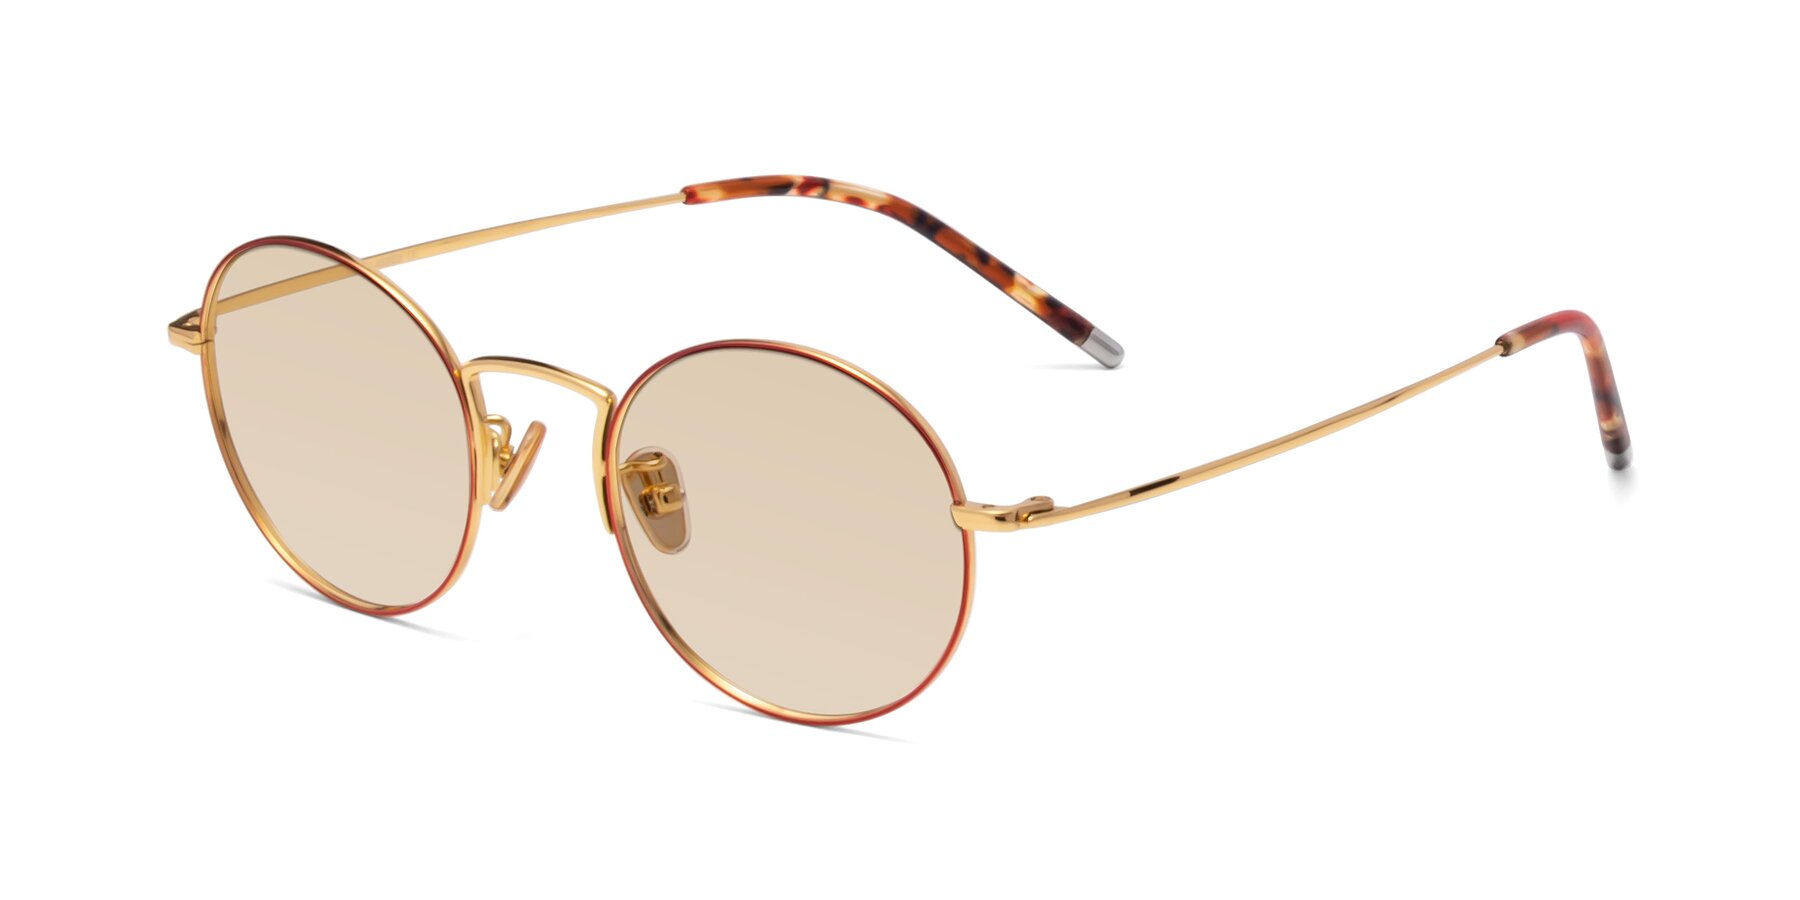 Angle of 80033 in Wine-Gold with Light Brown Tinted Lenses